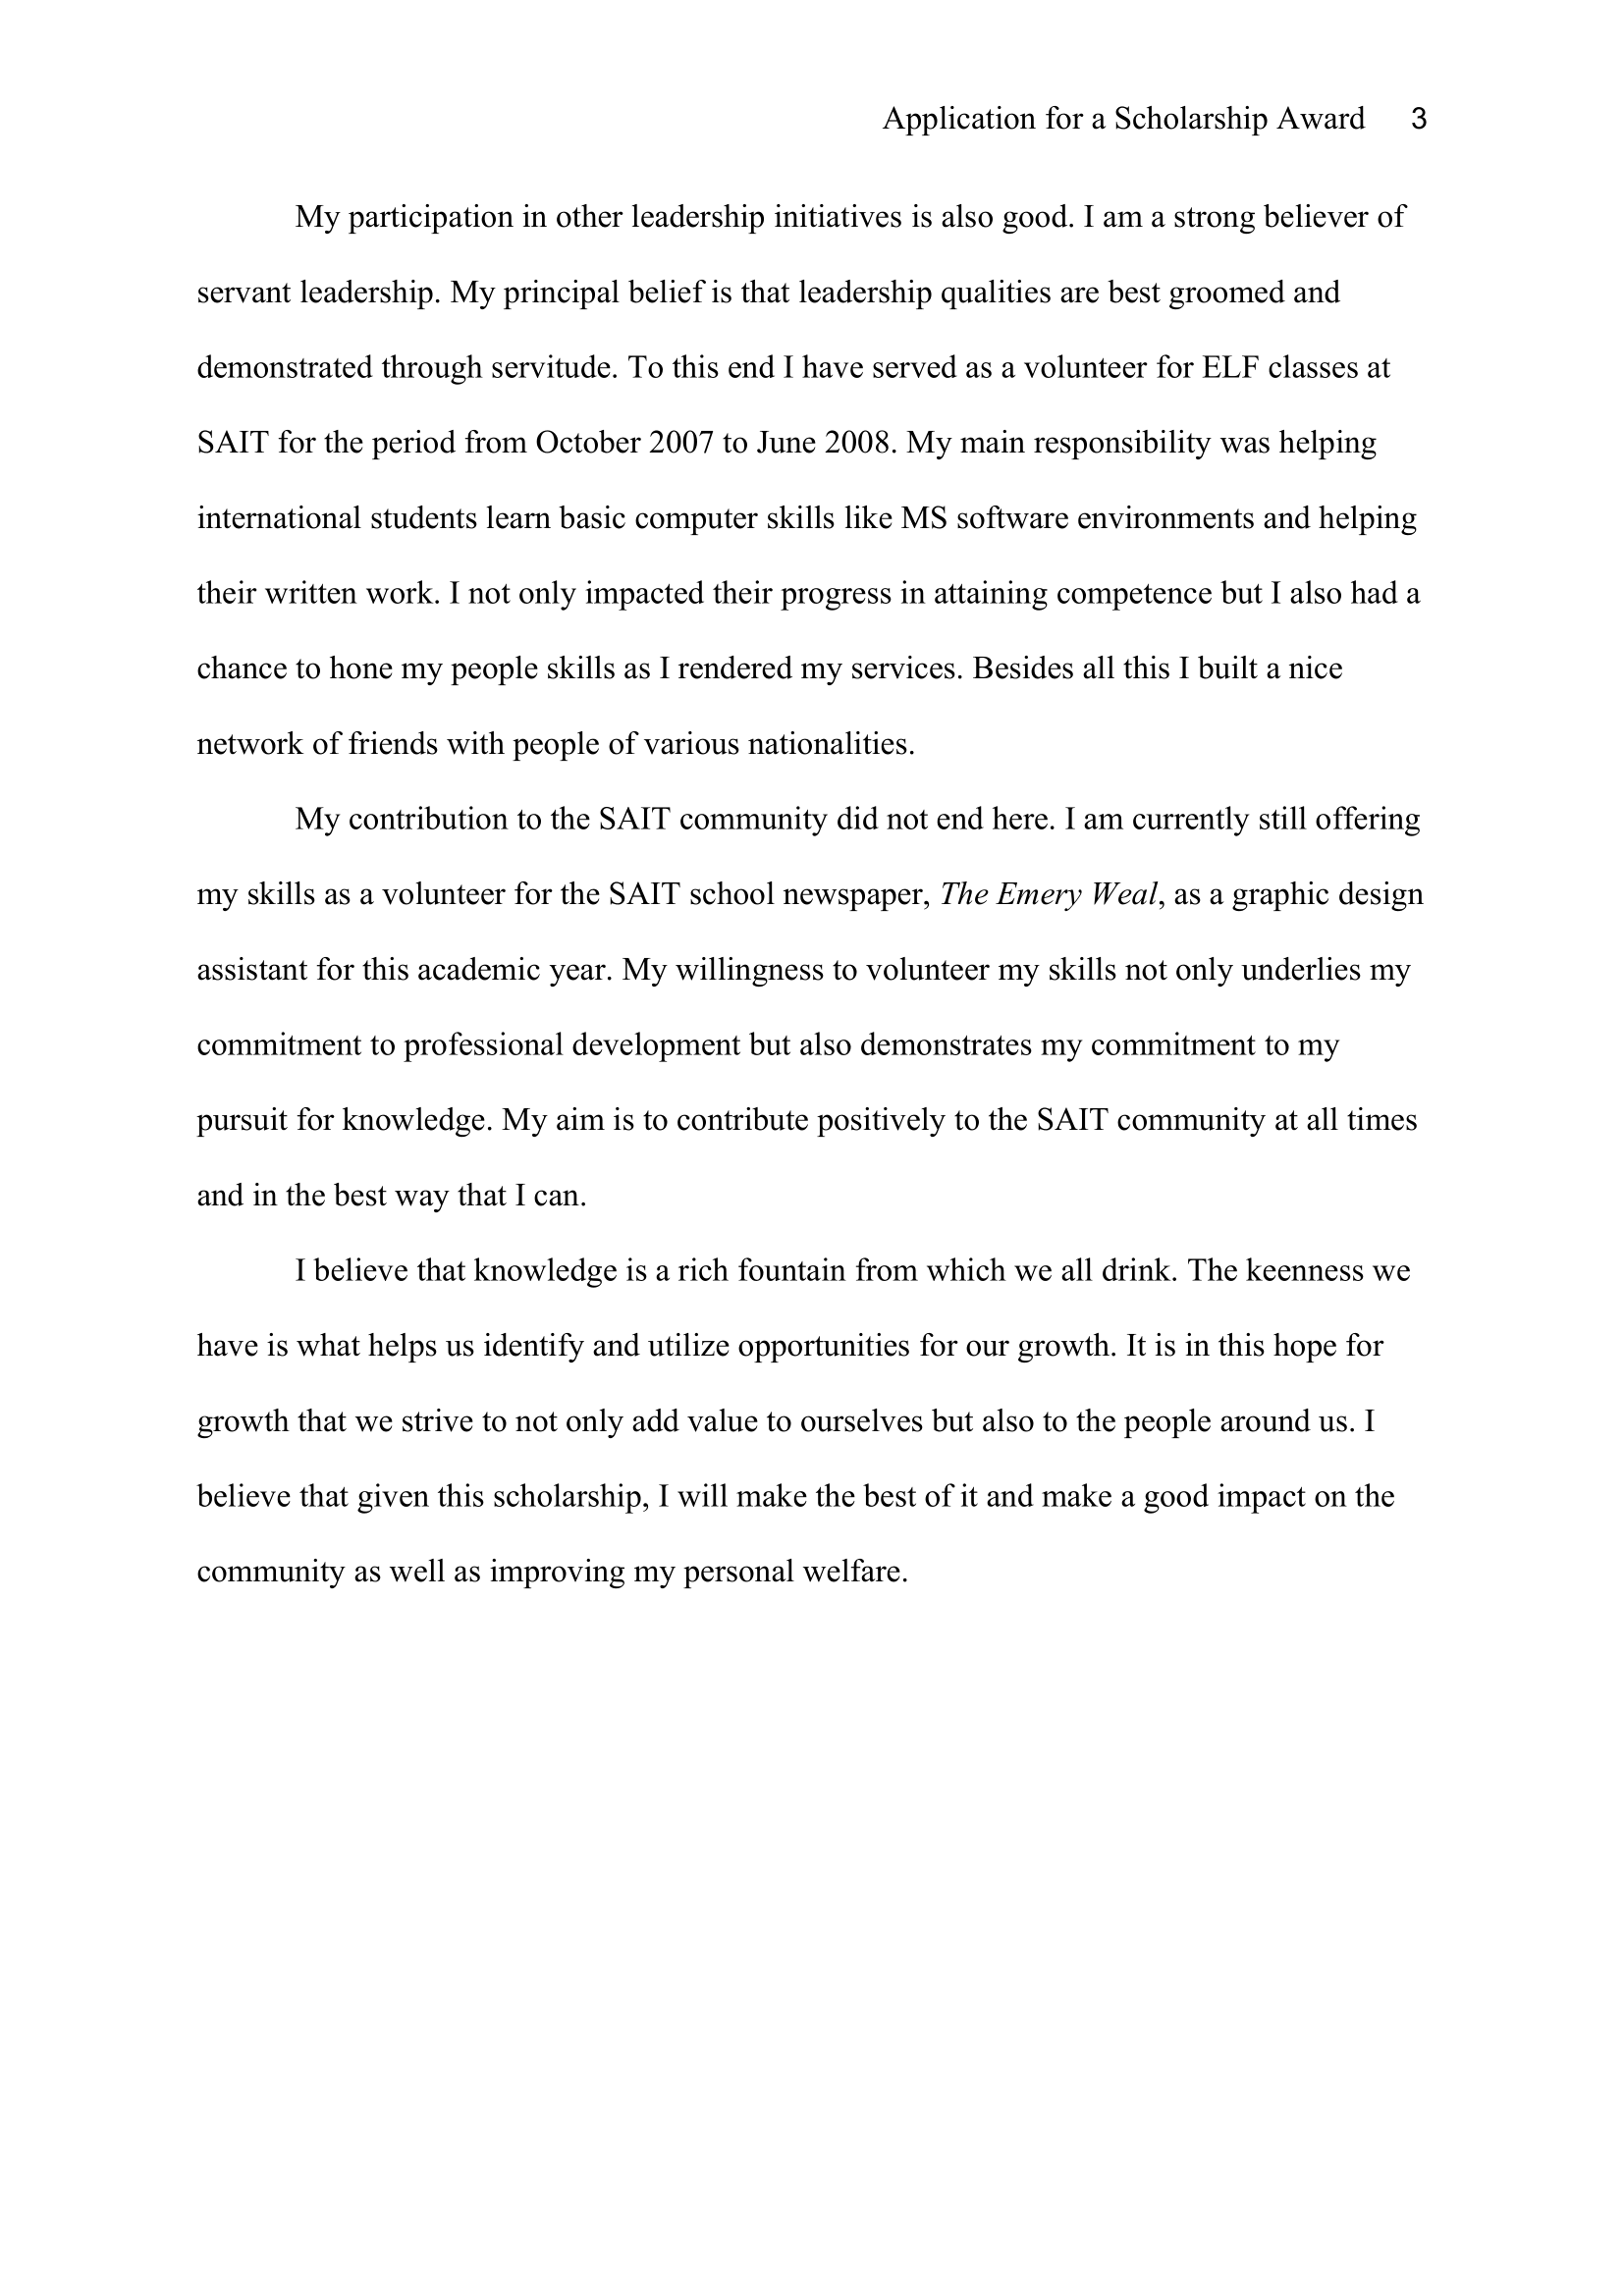 sample scholarship essay about why you deserve it